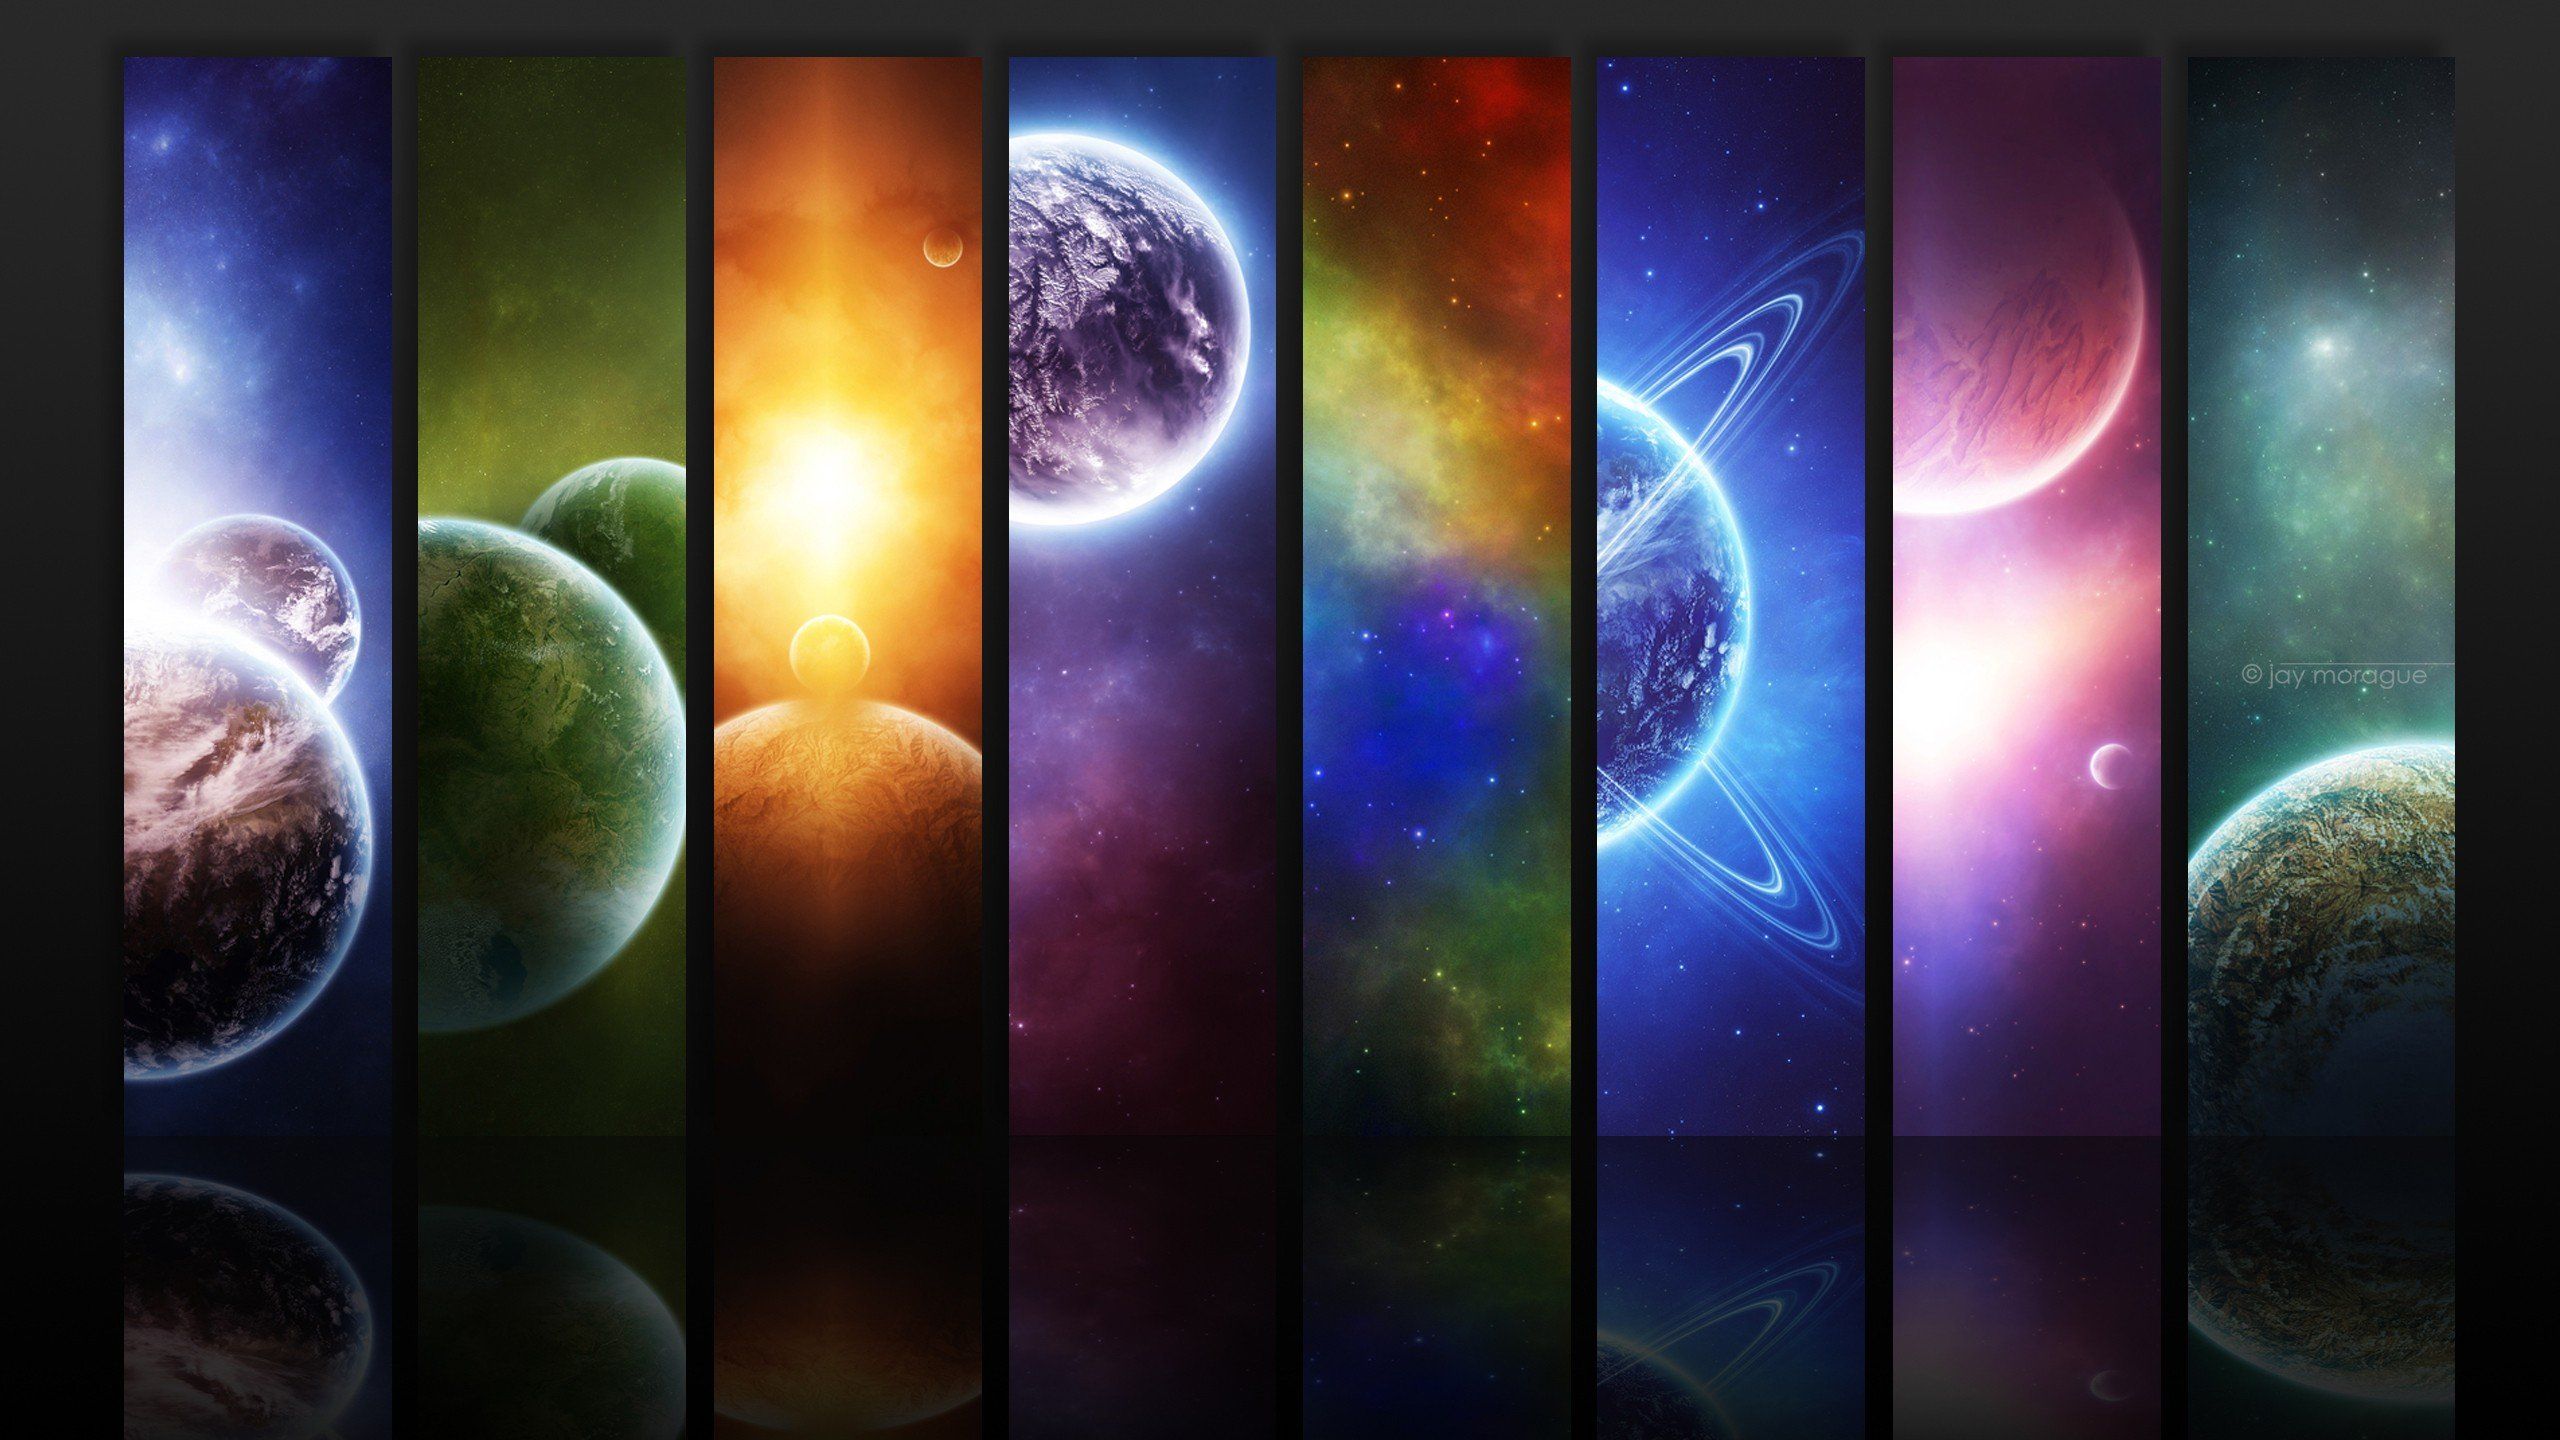 of Space 4K wallpaper for your desktop or mobile screen